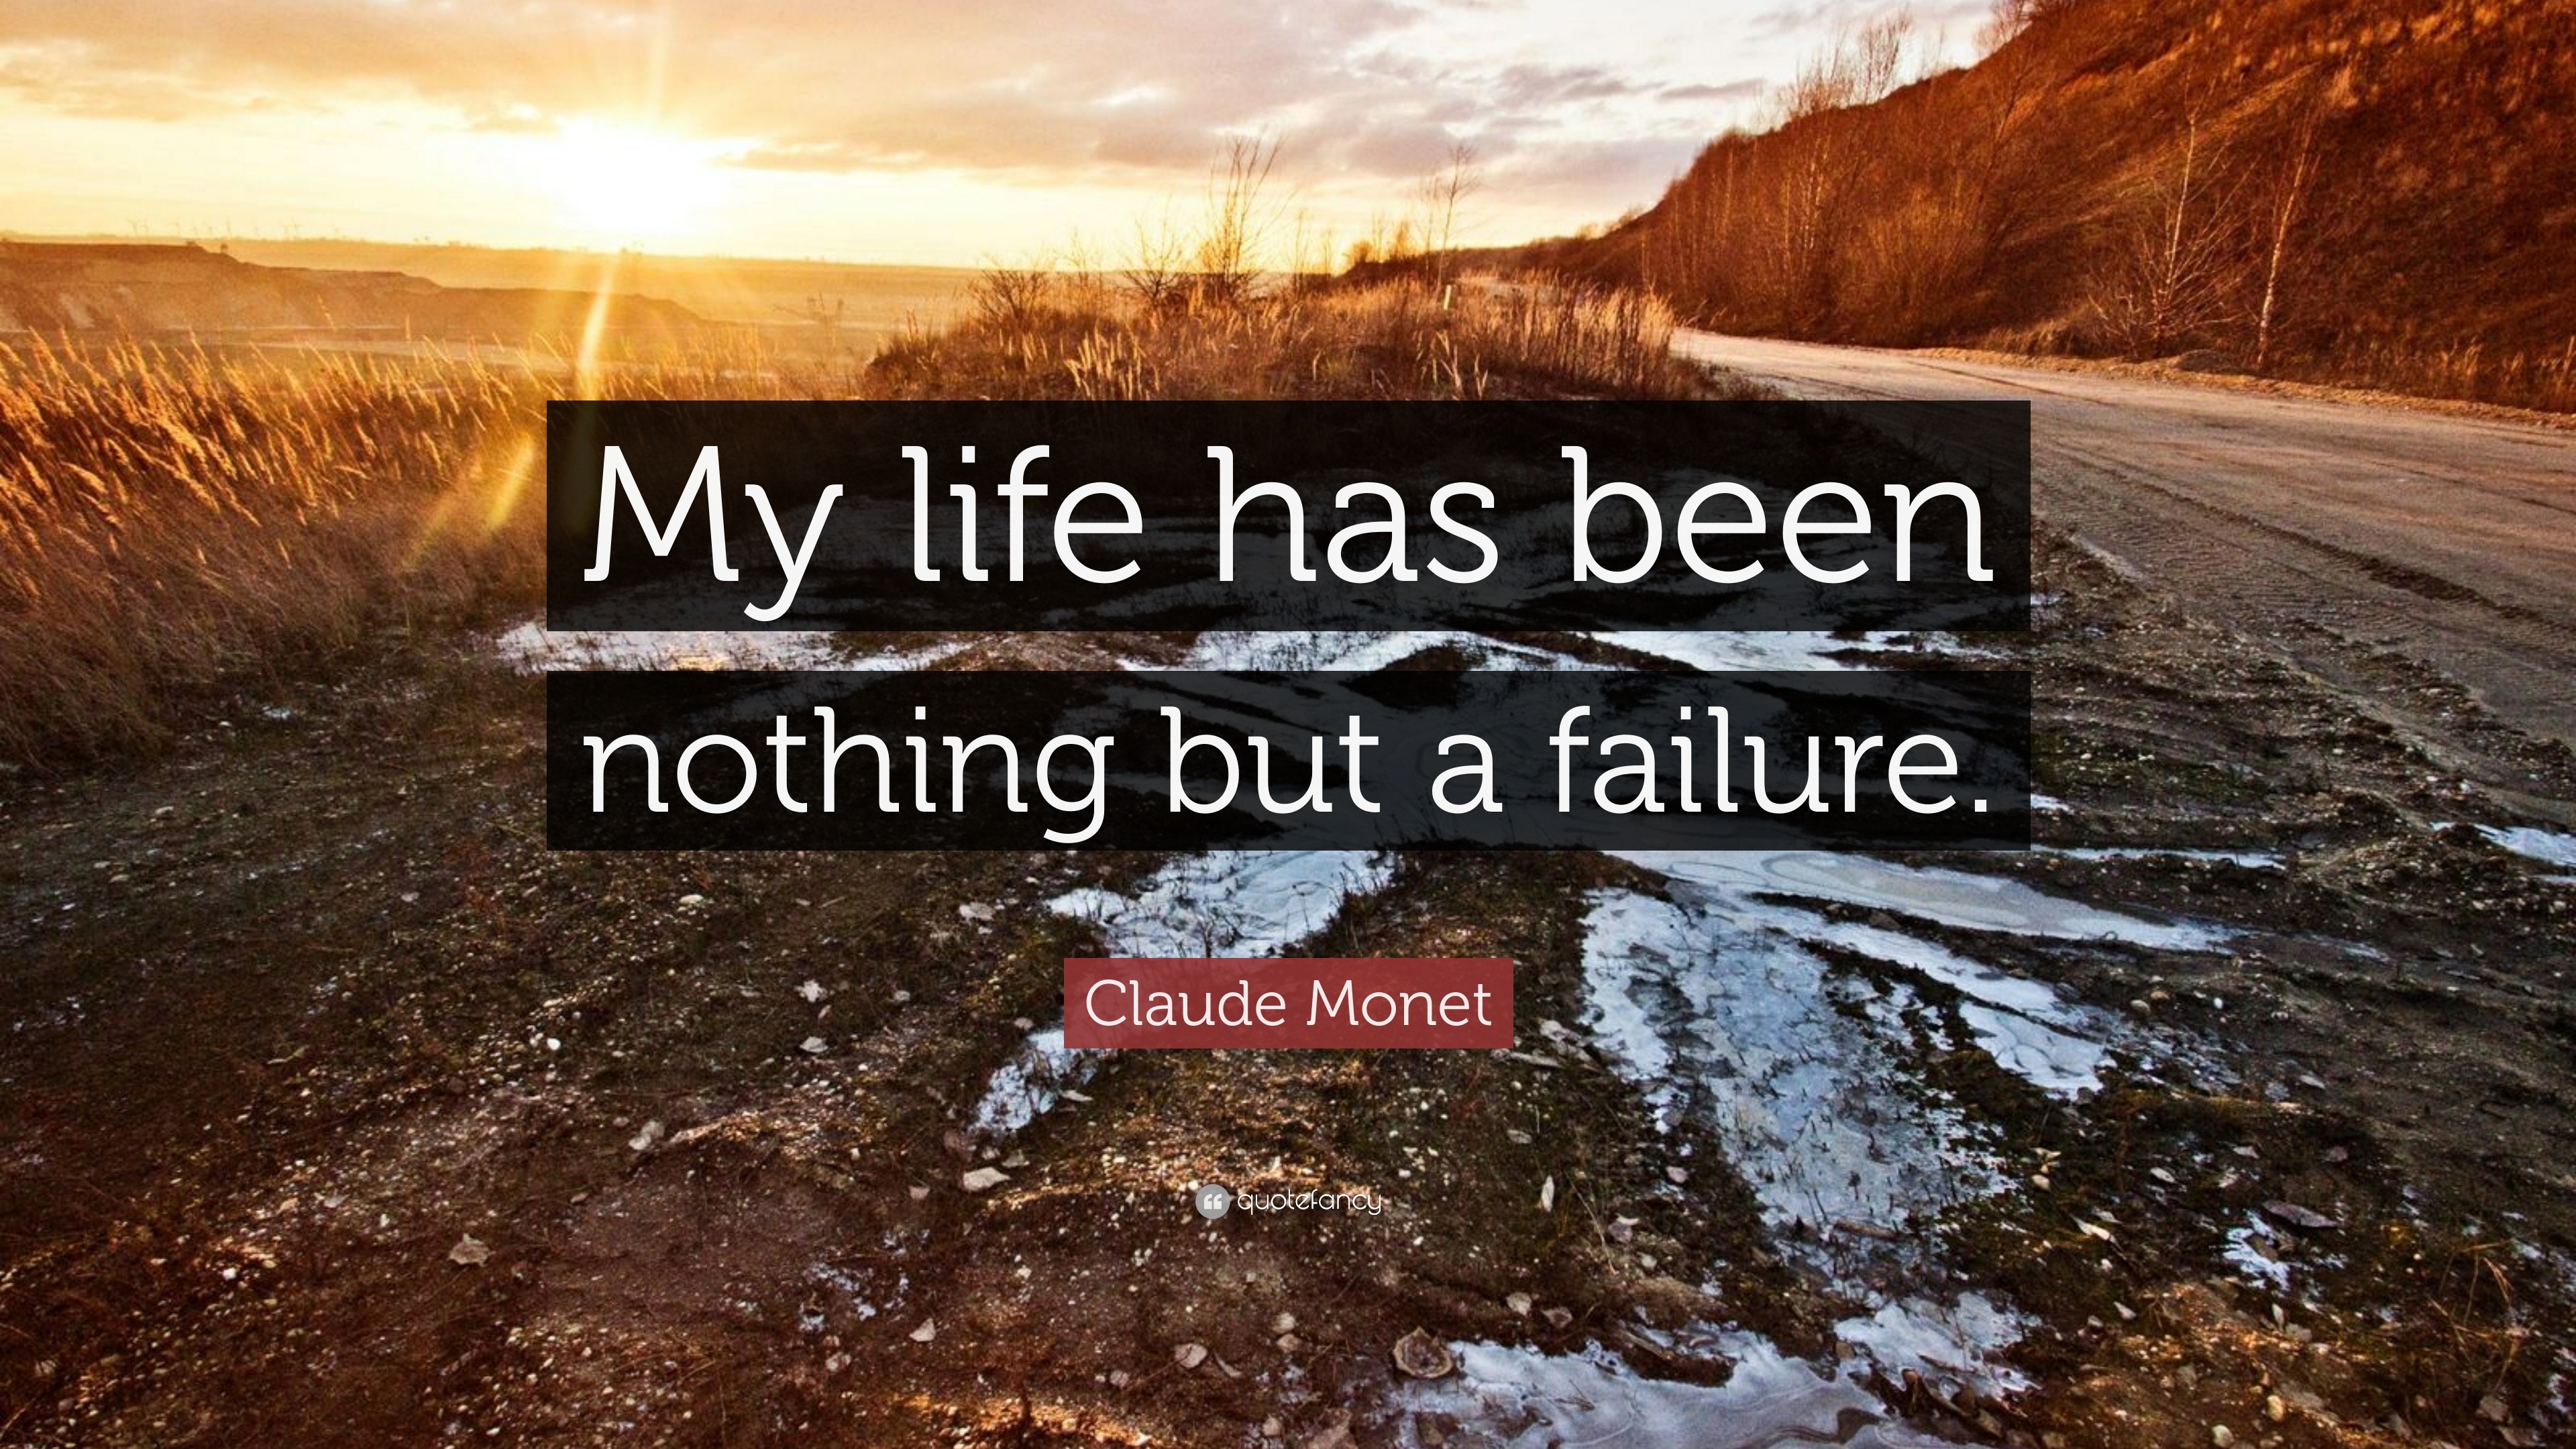 Claude Monet Quote: “My life has been nothing but a failure.”